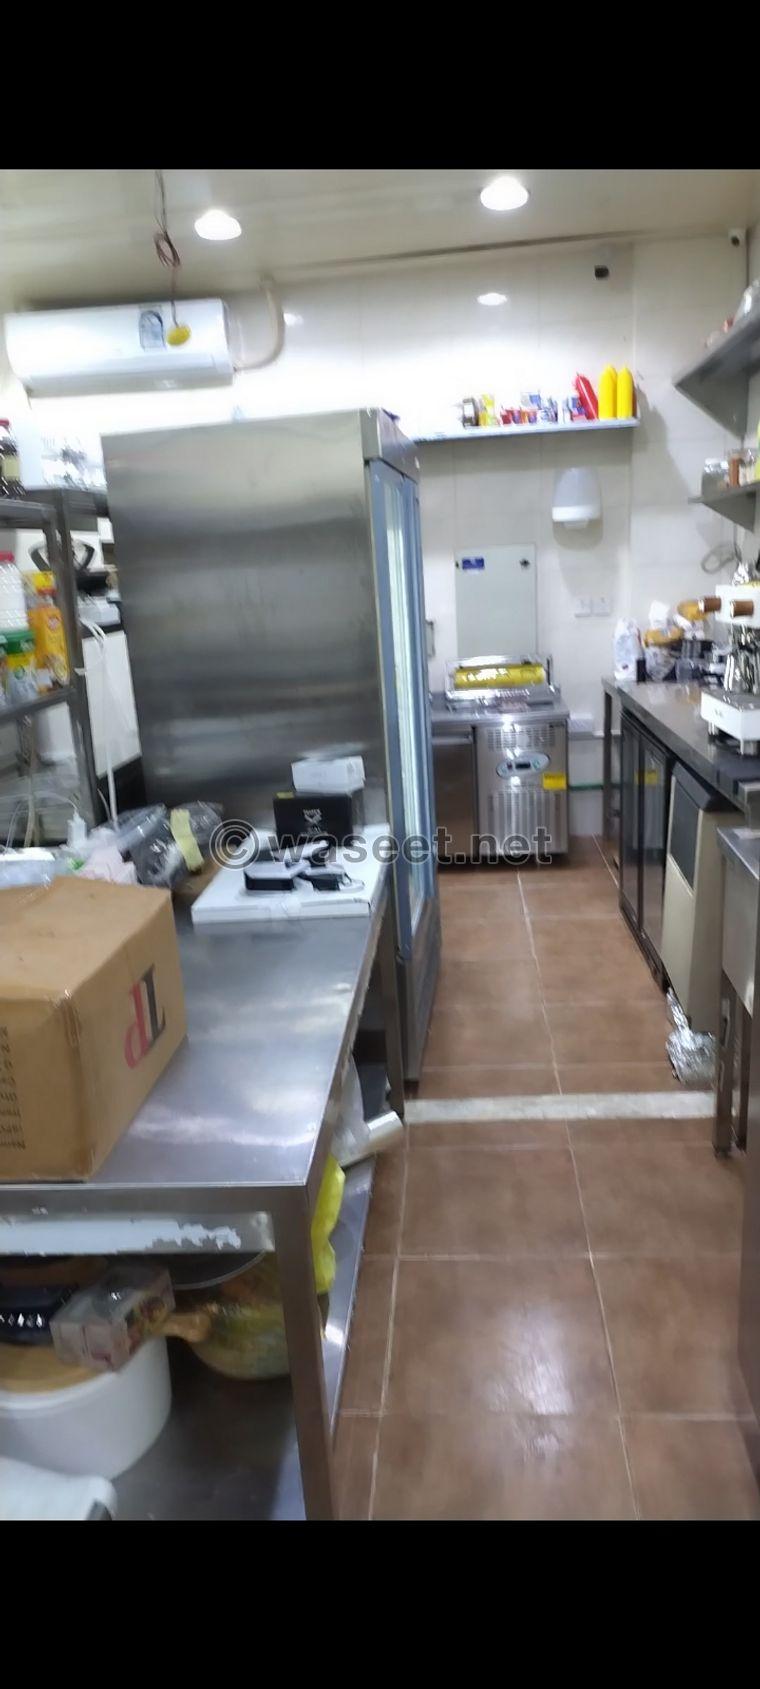 Central kitchen for sale 0